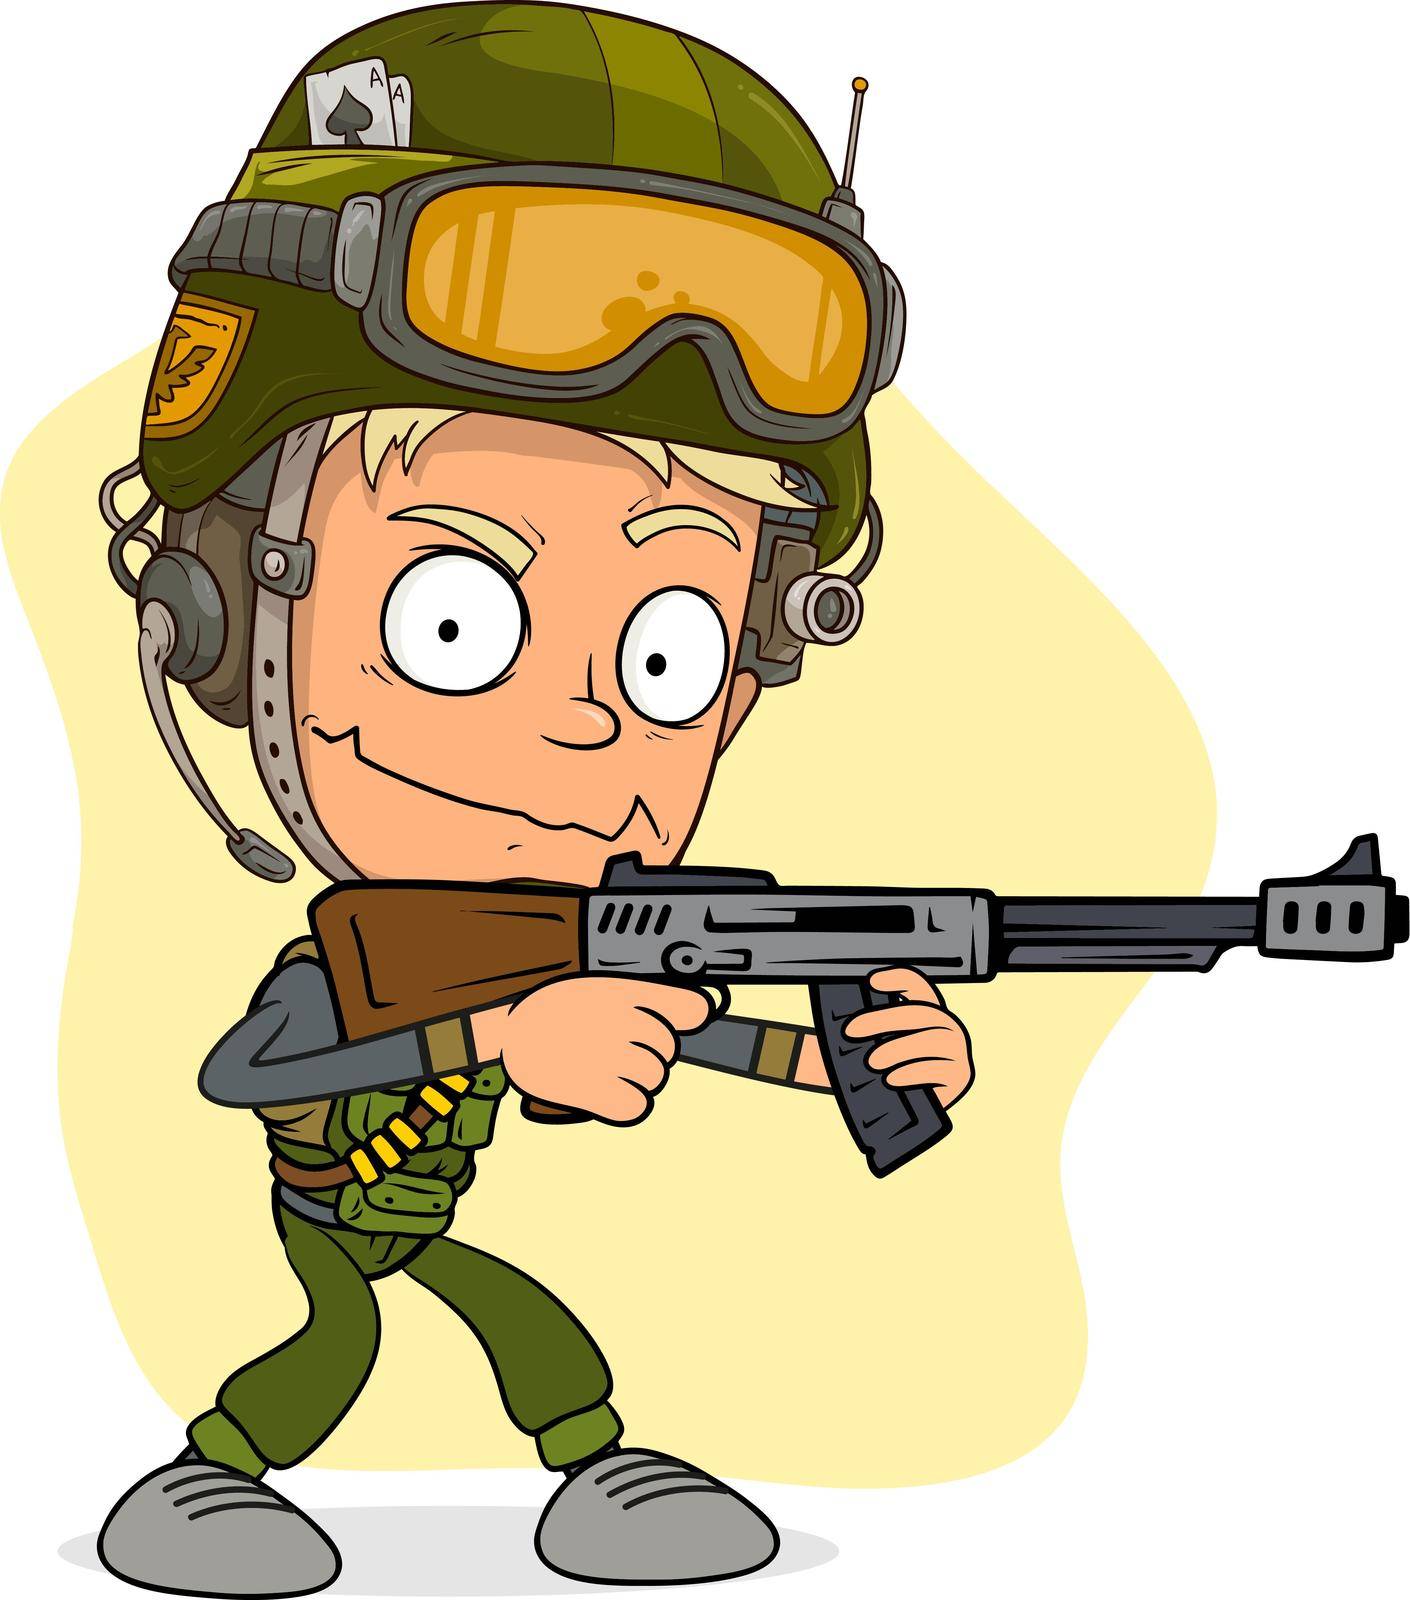 Cartoon army soldier with rifle and helmet by GB_Art